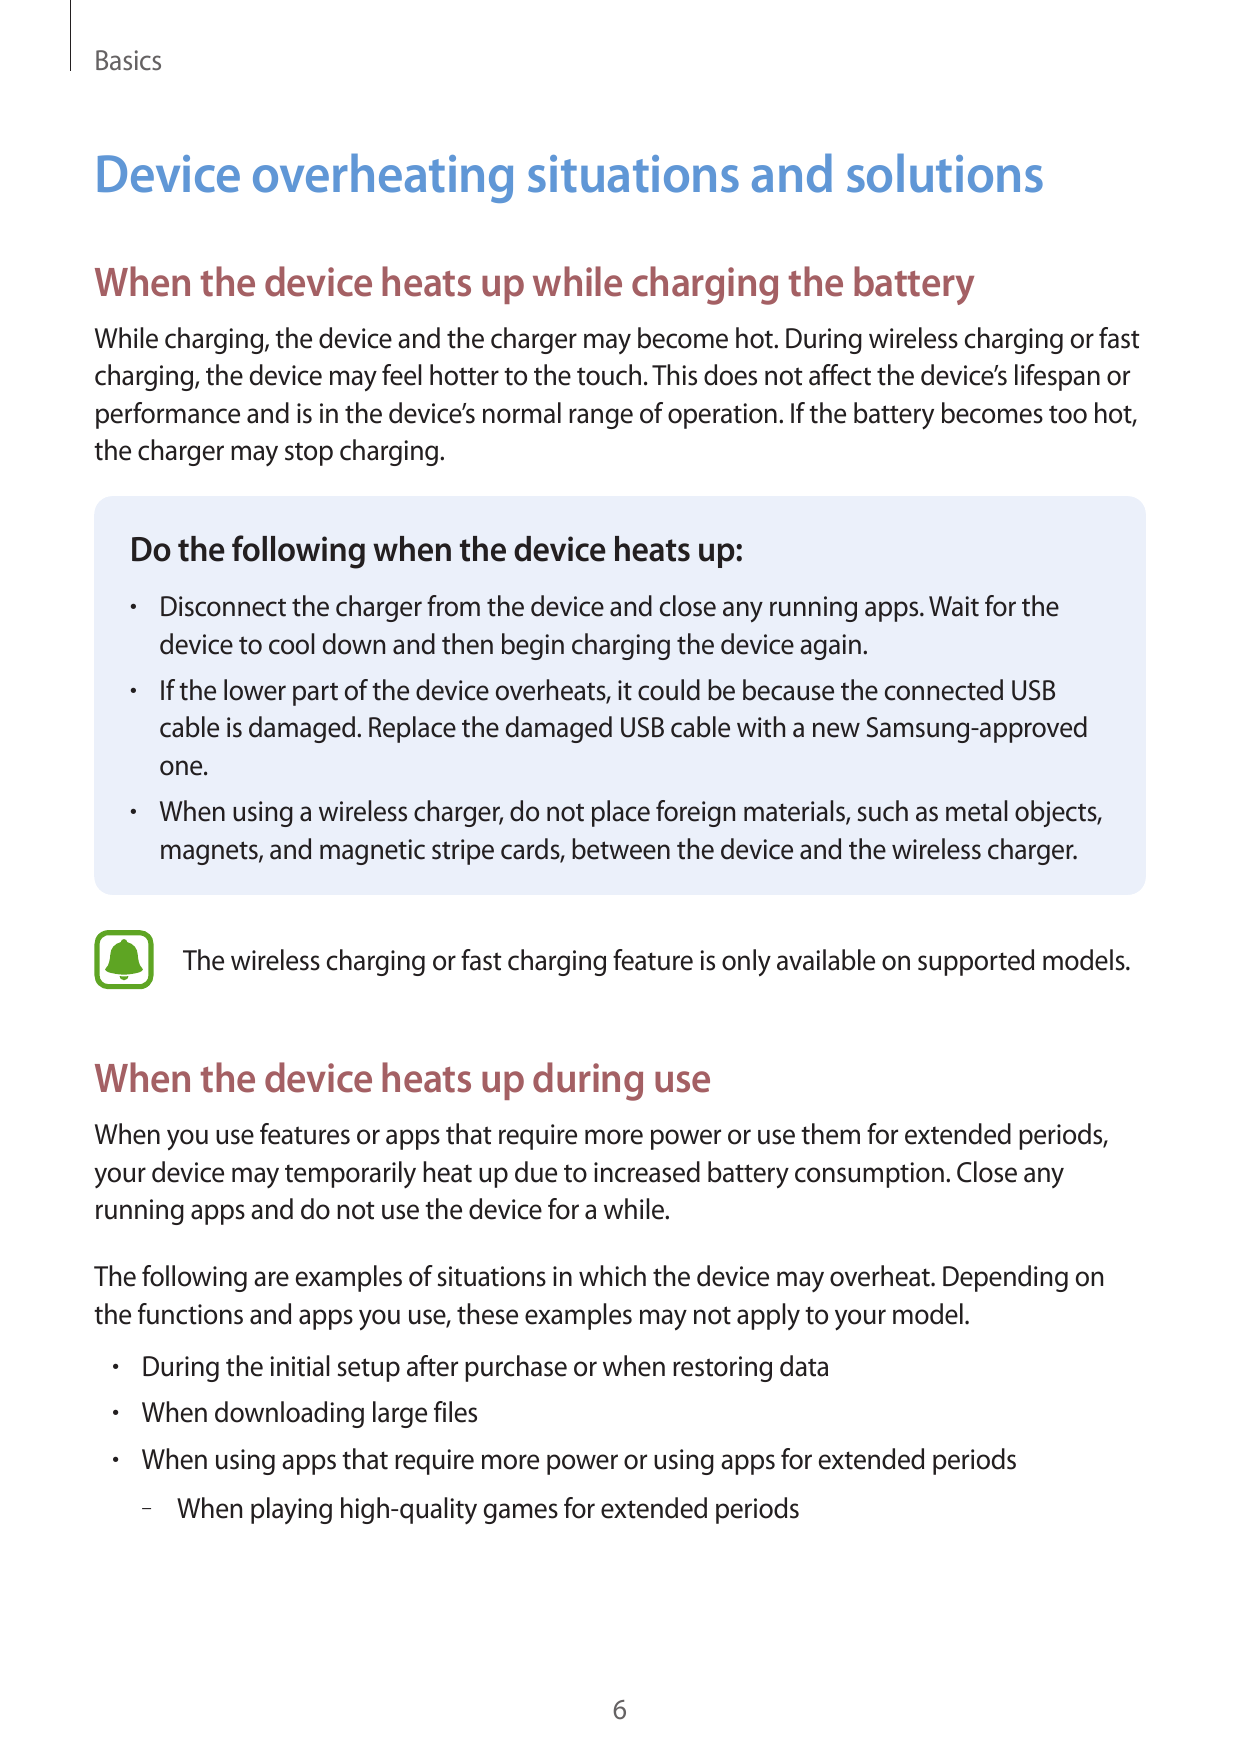 BasicsDevice overheating situations and solutionsWhen the device heats up while charging the batteryWhile charging, the device a